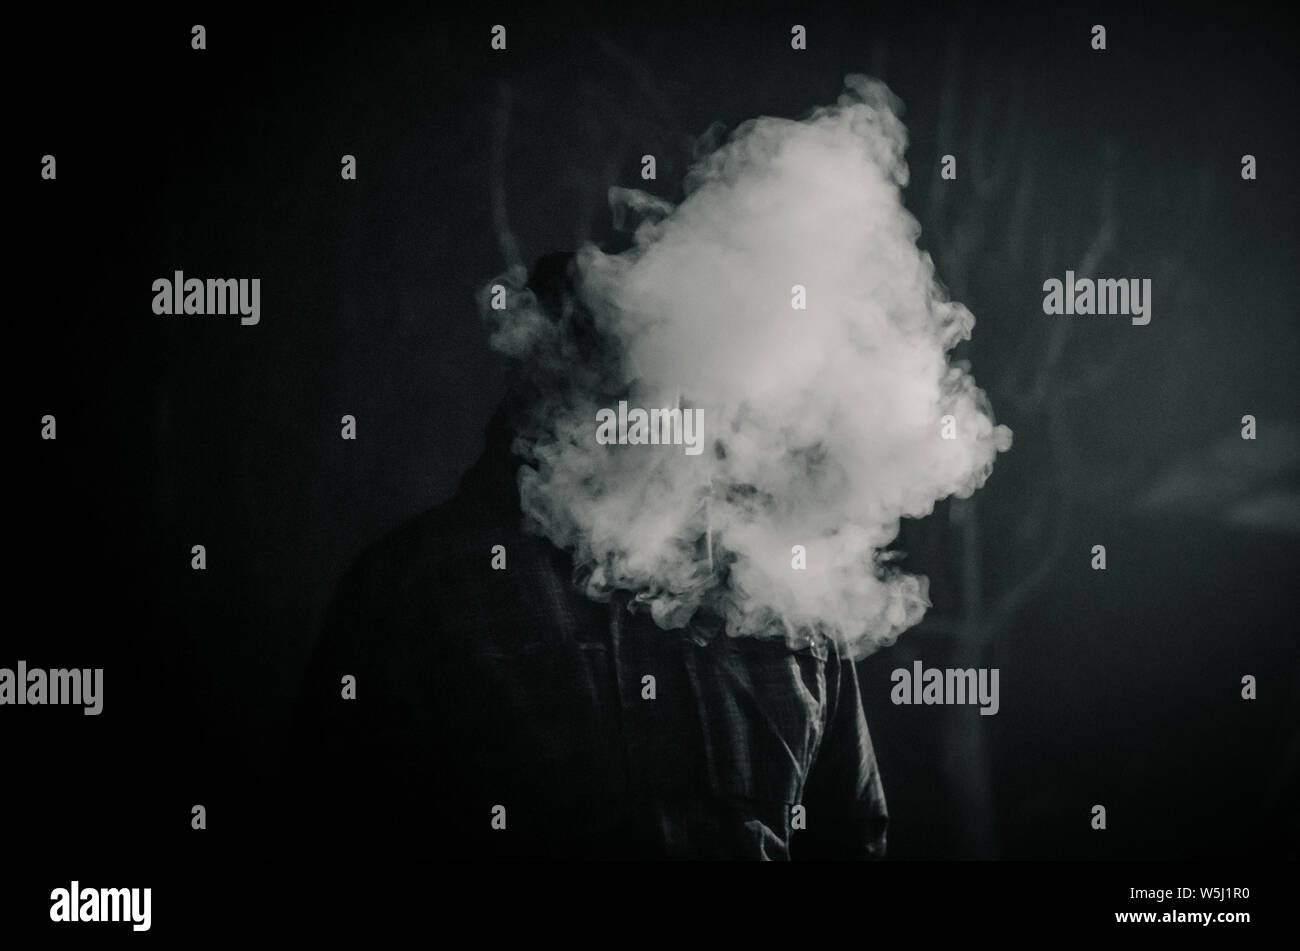 strange man smoking at night with big steam effect from the cigarette Stock Photo